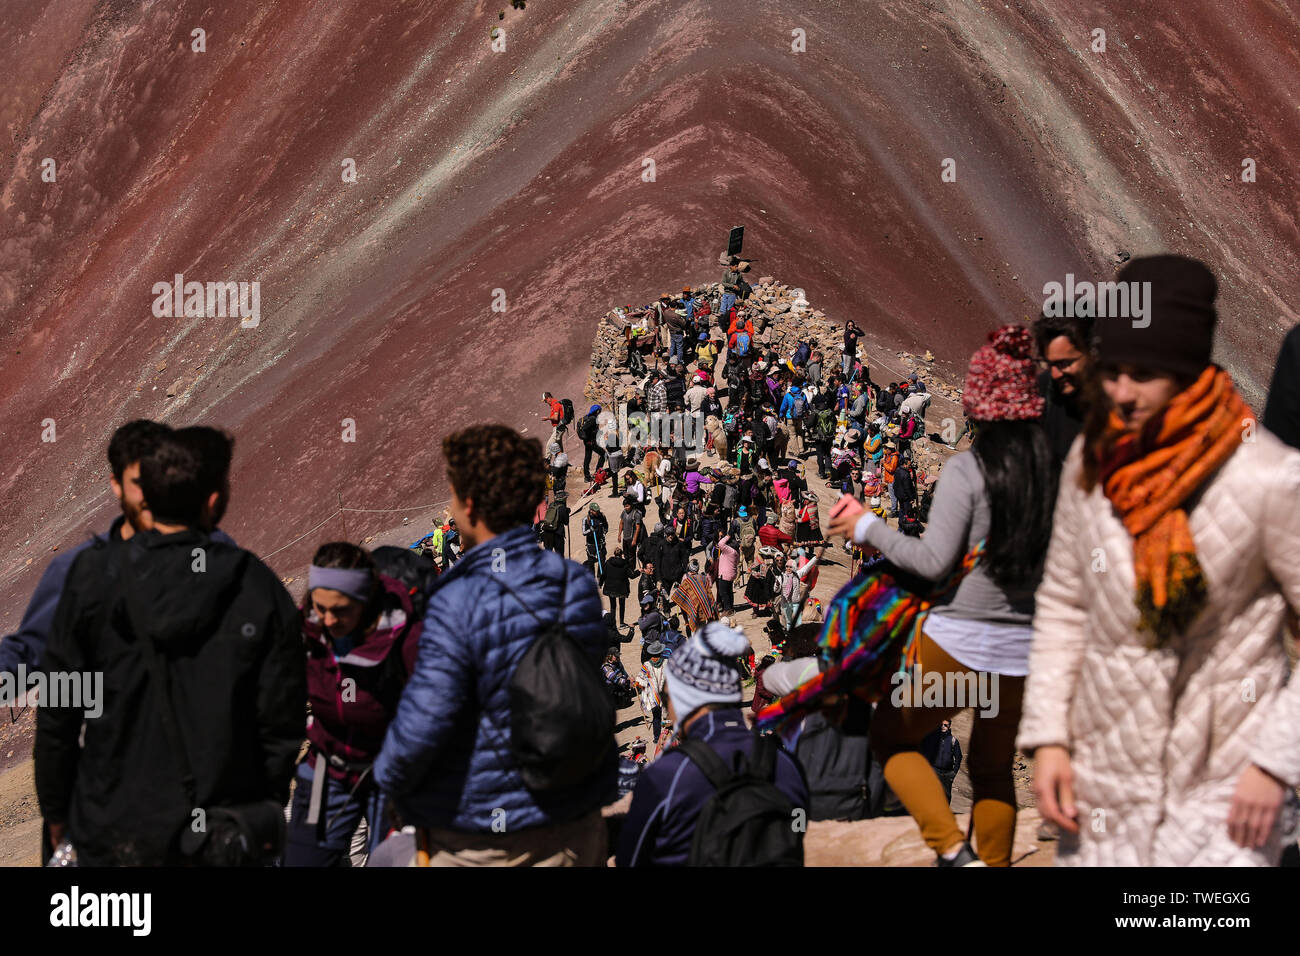 02 May 2019, Peru, Cusco: The Vinicunca, or the Rainbowmontain with an altitude of 5200 meters above zero, is located in the south of Peru and is increasingly developing into a tourist hotspot for day trippers from nearby Cusco. Only a few years ago the mountain was covered with snow and ice. Now the seven colours attract tourists from all over the world like a magnet. The Vinicunca is in the process of losing the rank in the tourist attraction Machu Picchu. The best view of Vinicunca is from the opposite mountain at 5340 metres above sea level. Photo: Tino Plunert/dpa-Zentralbild/ZB Stock Photo